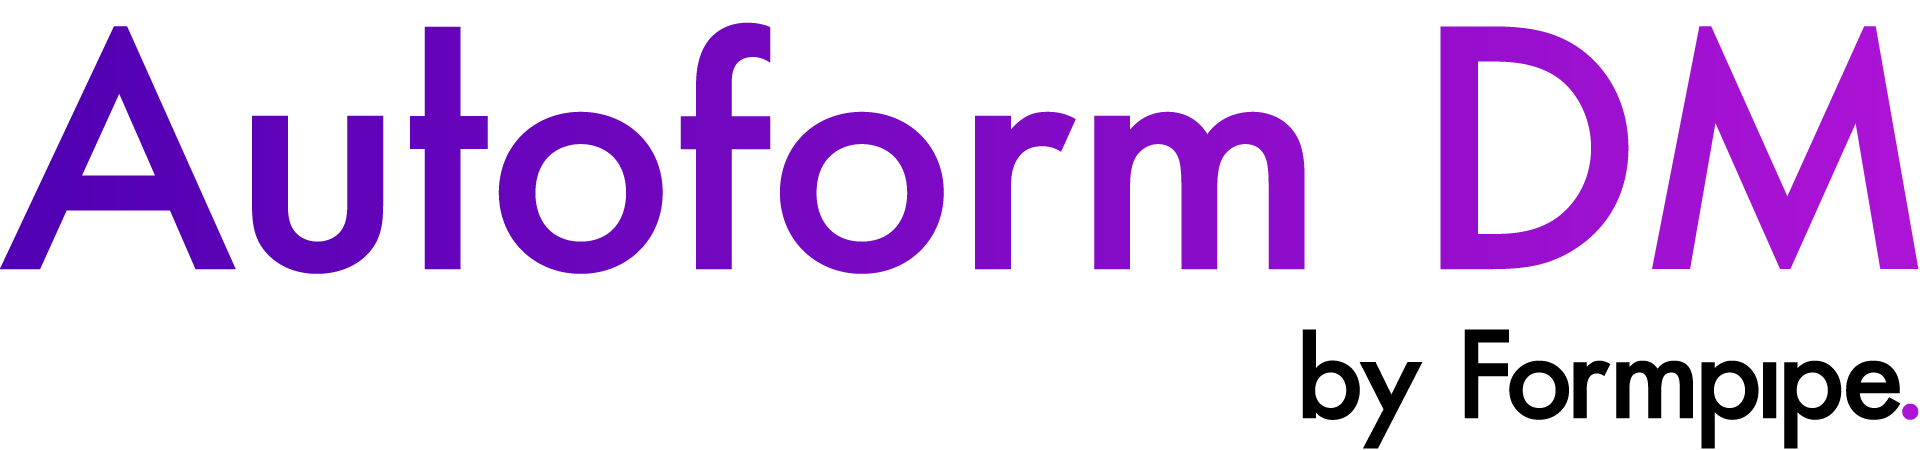 Autoform DM by Formpipe ColourSmall.png